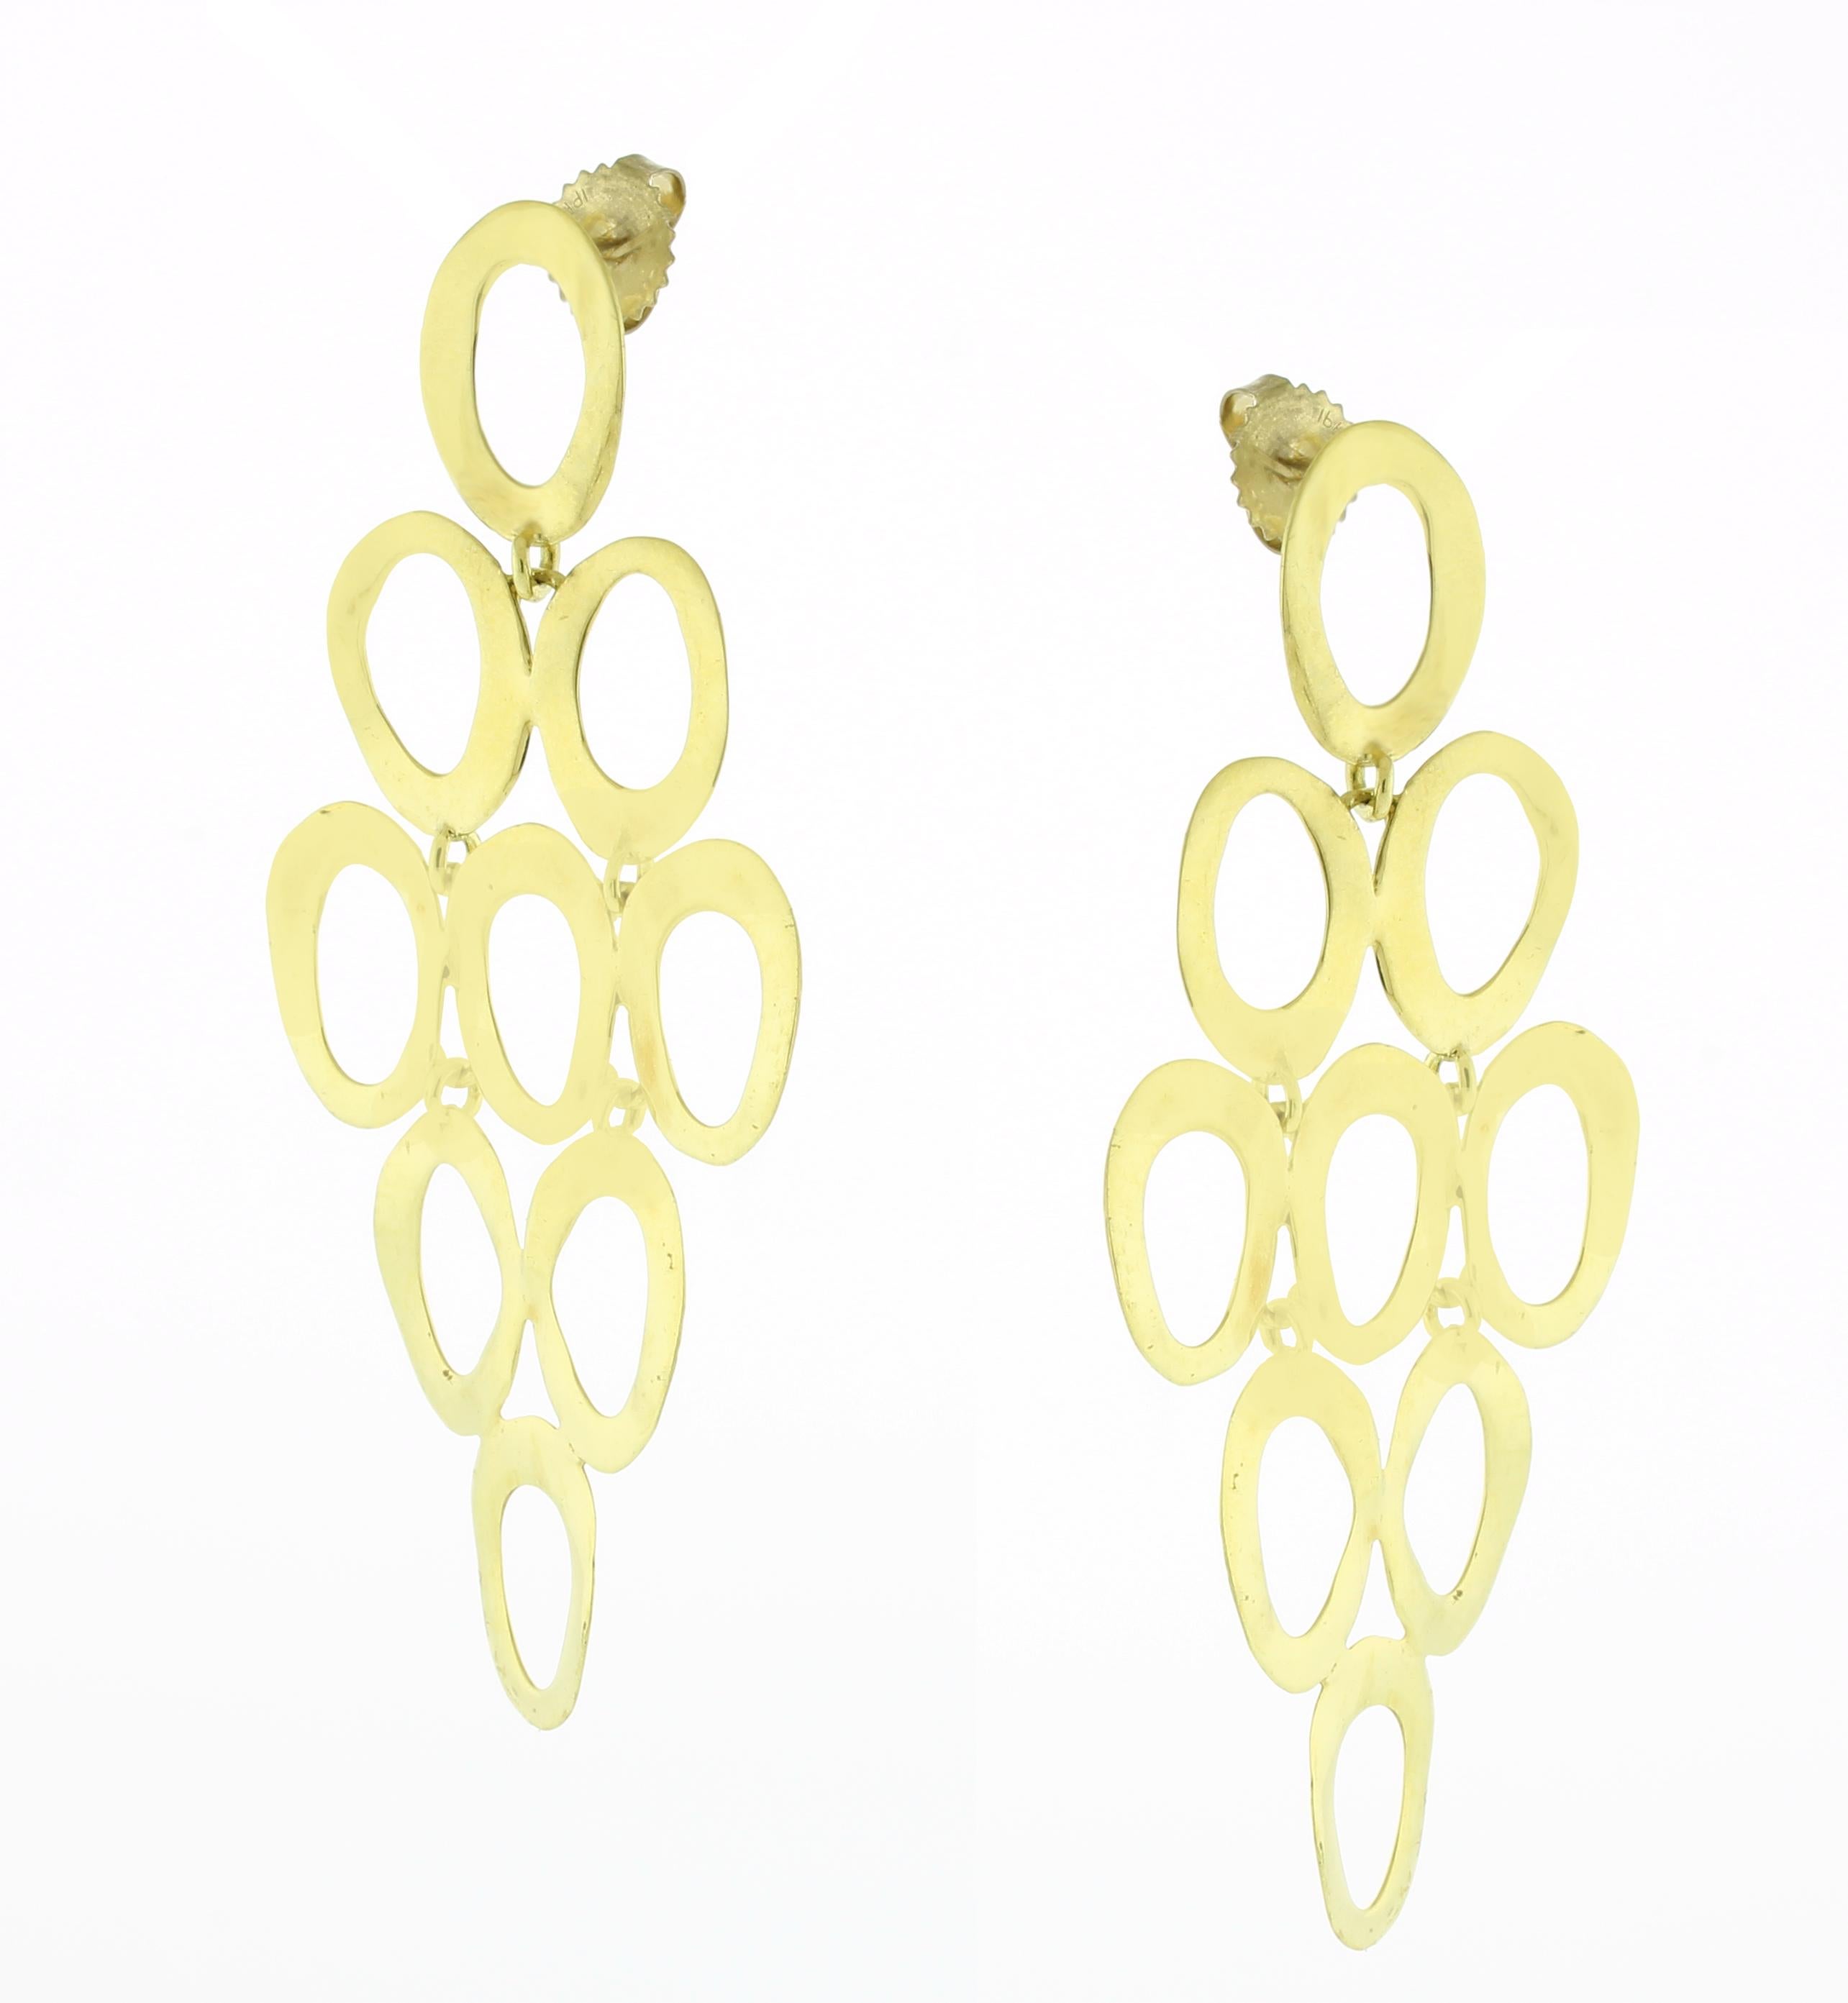 From Ippolita, these 18 karat yellow gold earrings are from the Classico Collection.
• Metal: 18kt Yellow Gold
• Circa: 2020s
• Weight: 8.7 grams
• Length: 2.5inches
• Width: 1.18inches
• Packaging: Pampillonia presentation box
• Condition: Excellent